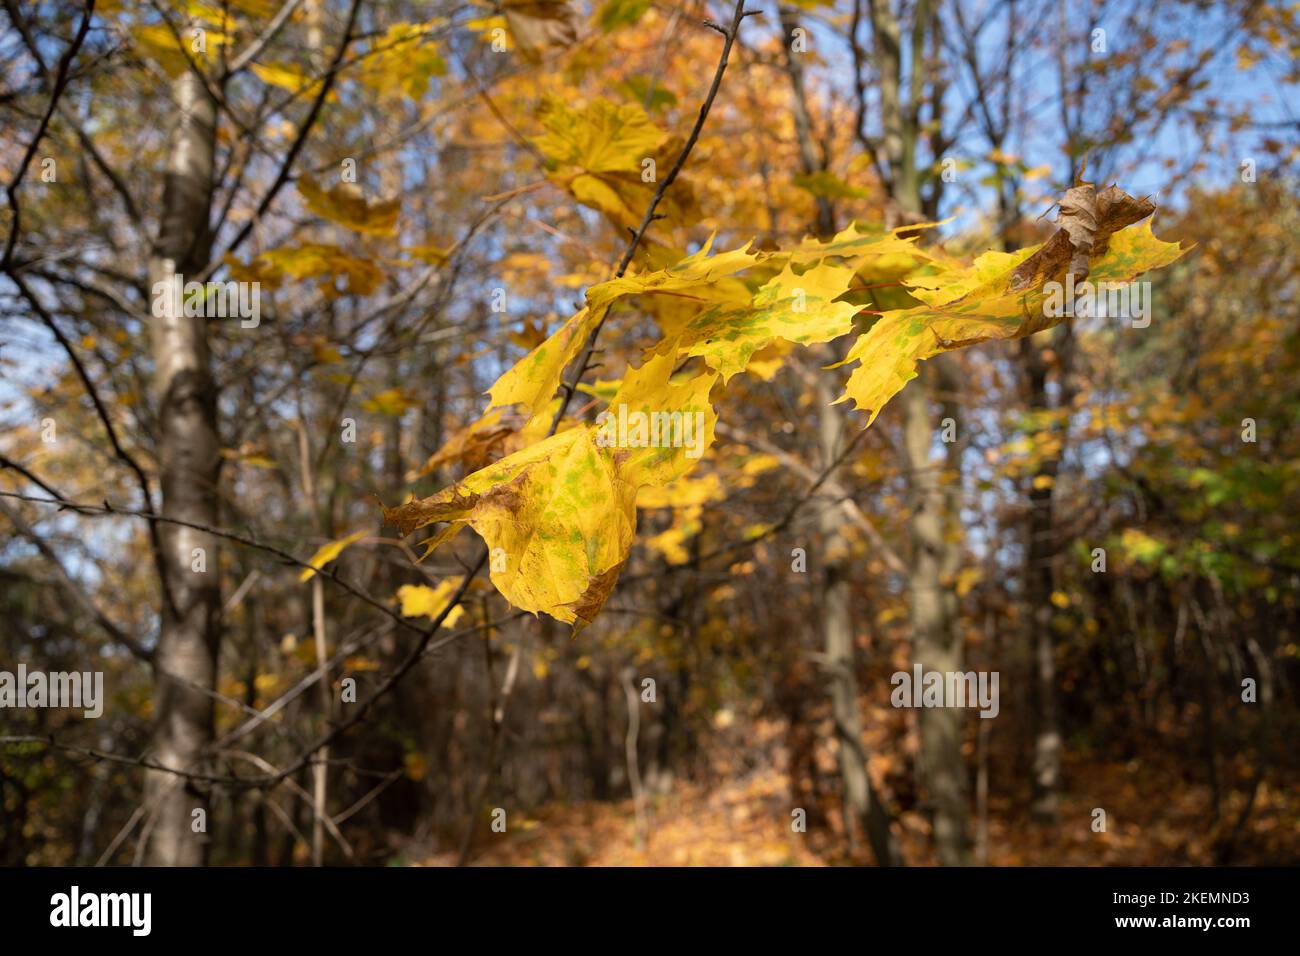 Indian Summer in Dolinki Krakowskie. Autumn leaves, blue sky, wonderful feelings and memories from that moment Stock Photo